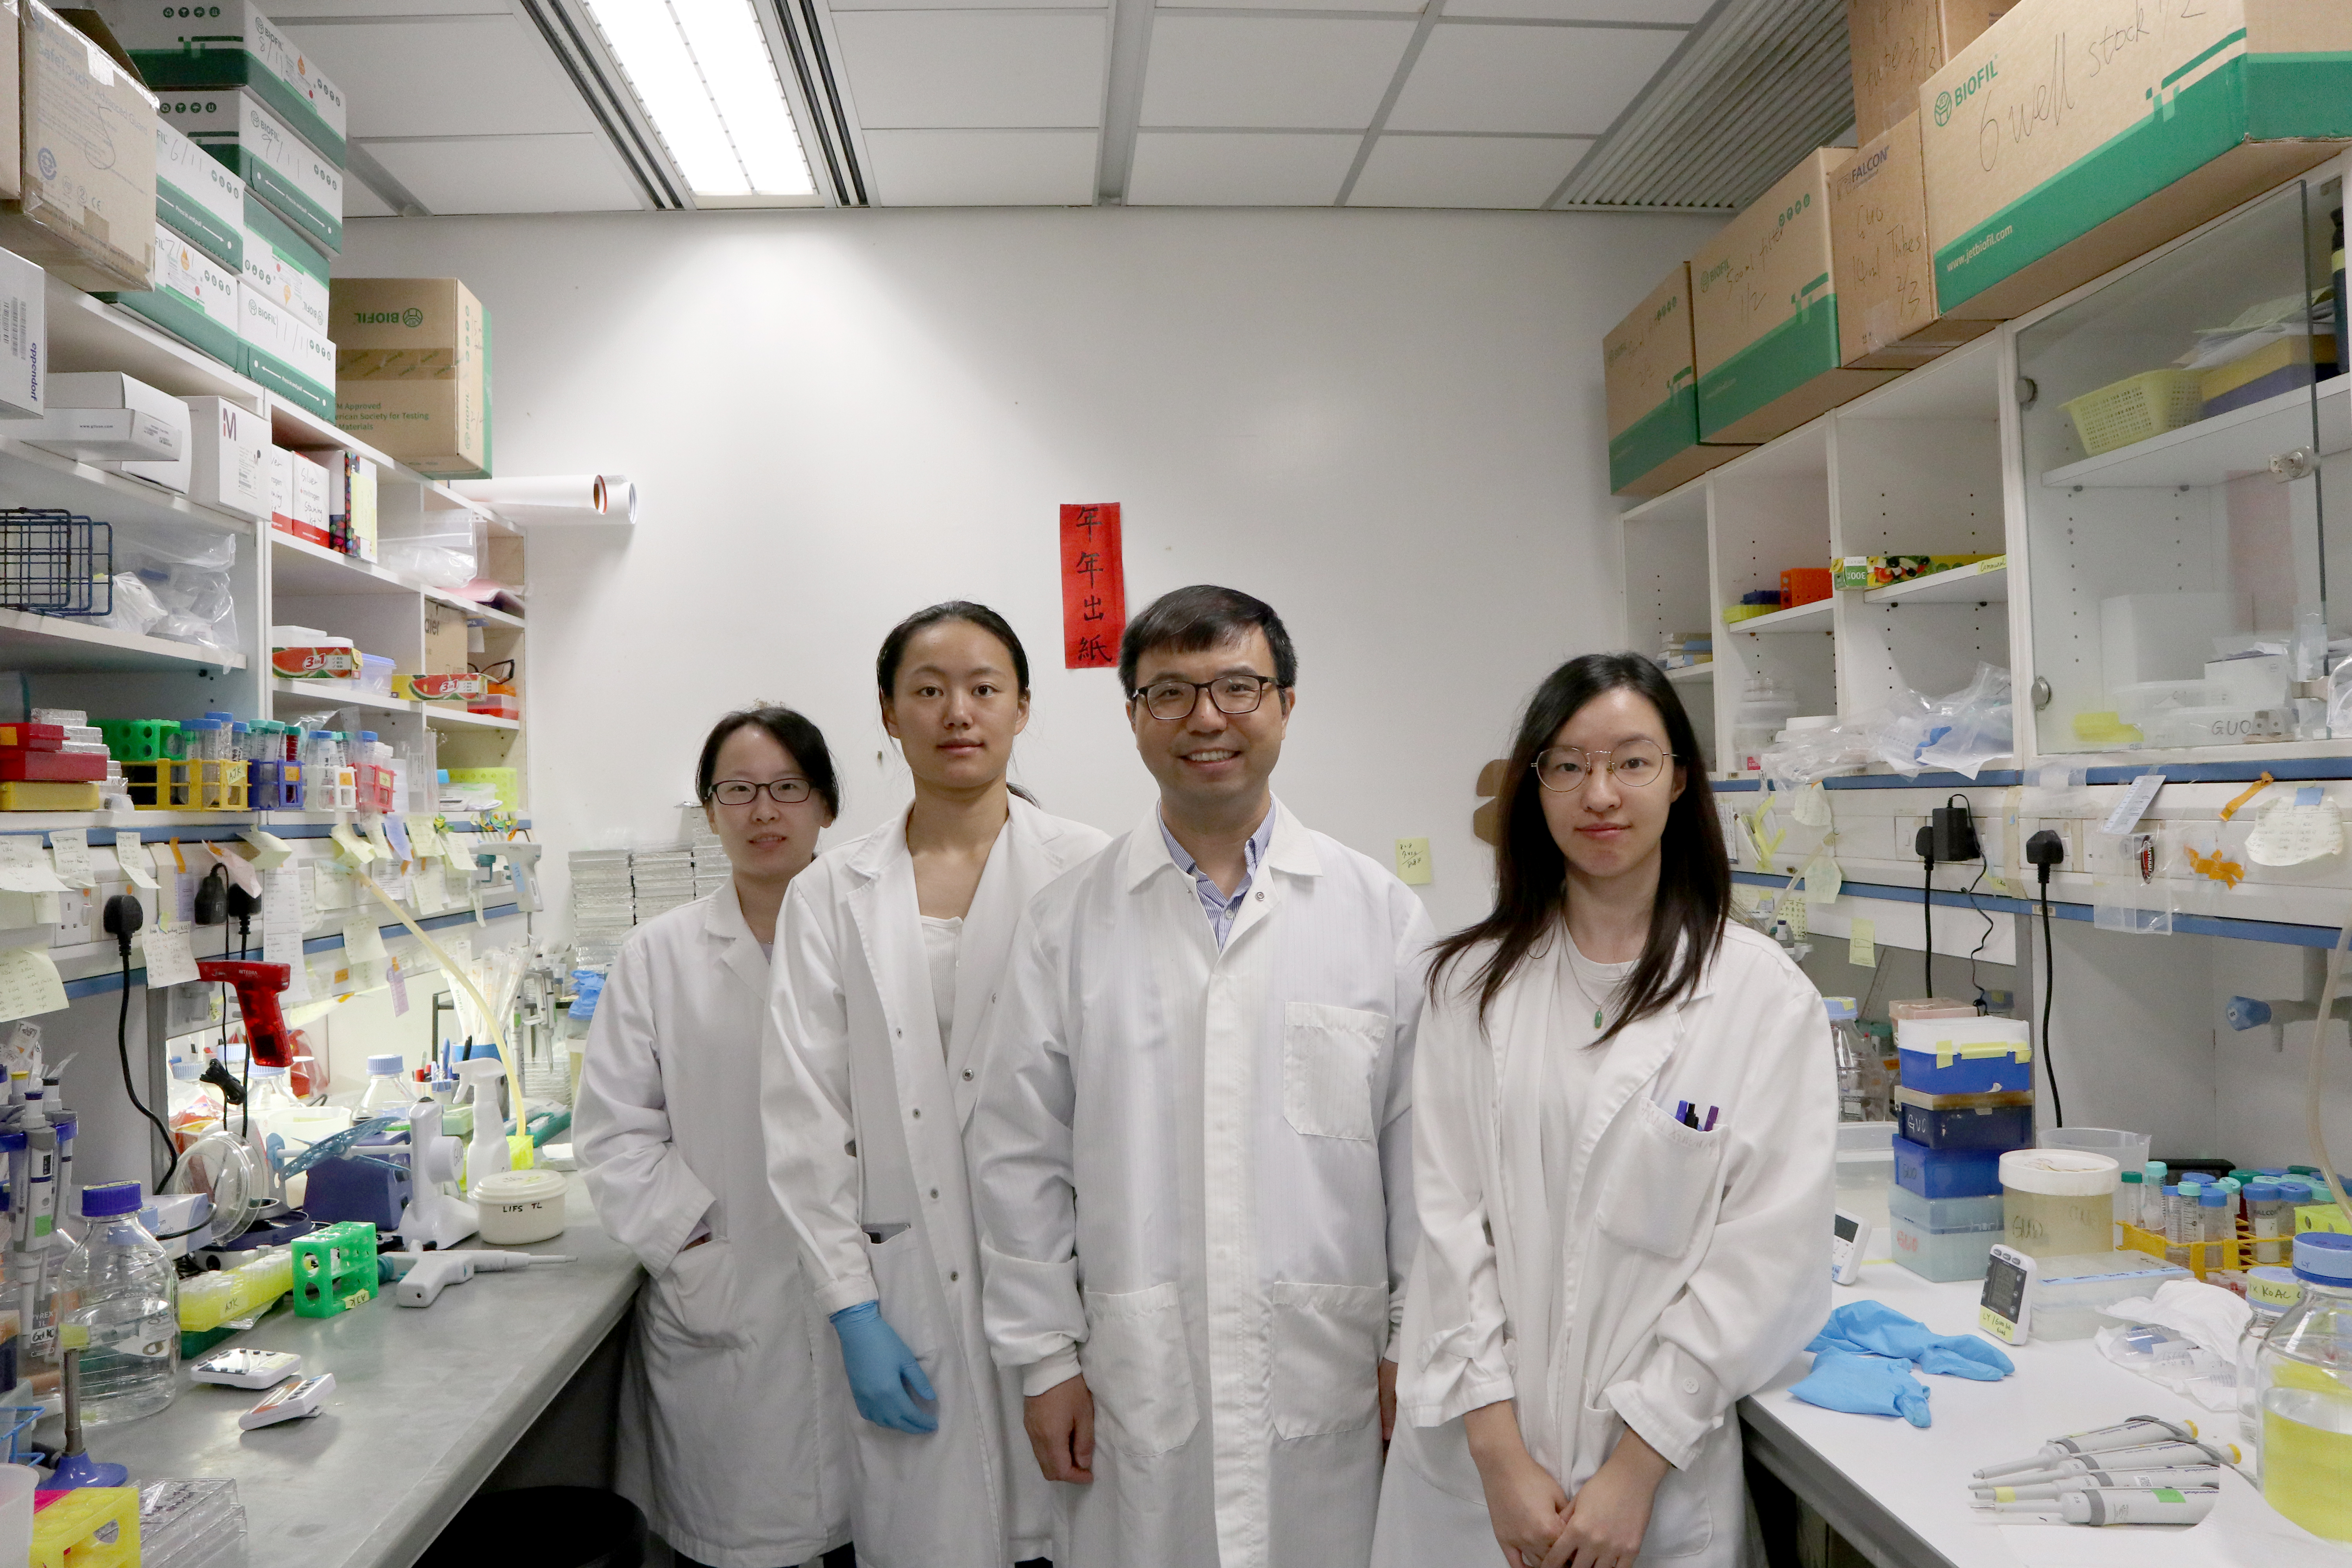 Prof. GUO Yusong (second right), Associate Professor in HKUST’s Division of Life Science, and his team members  Close